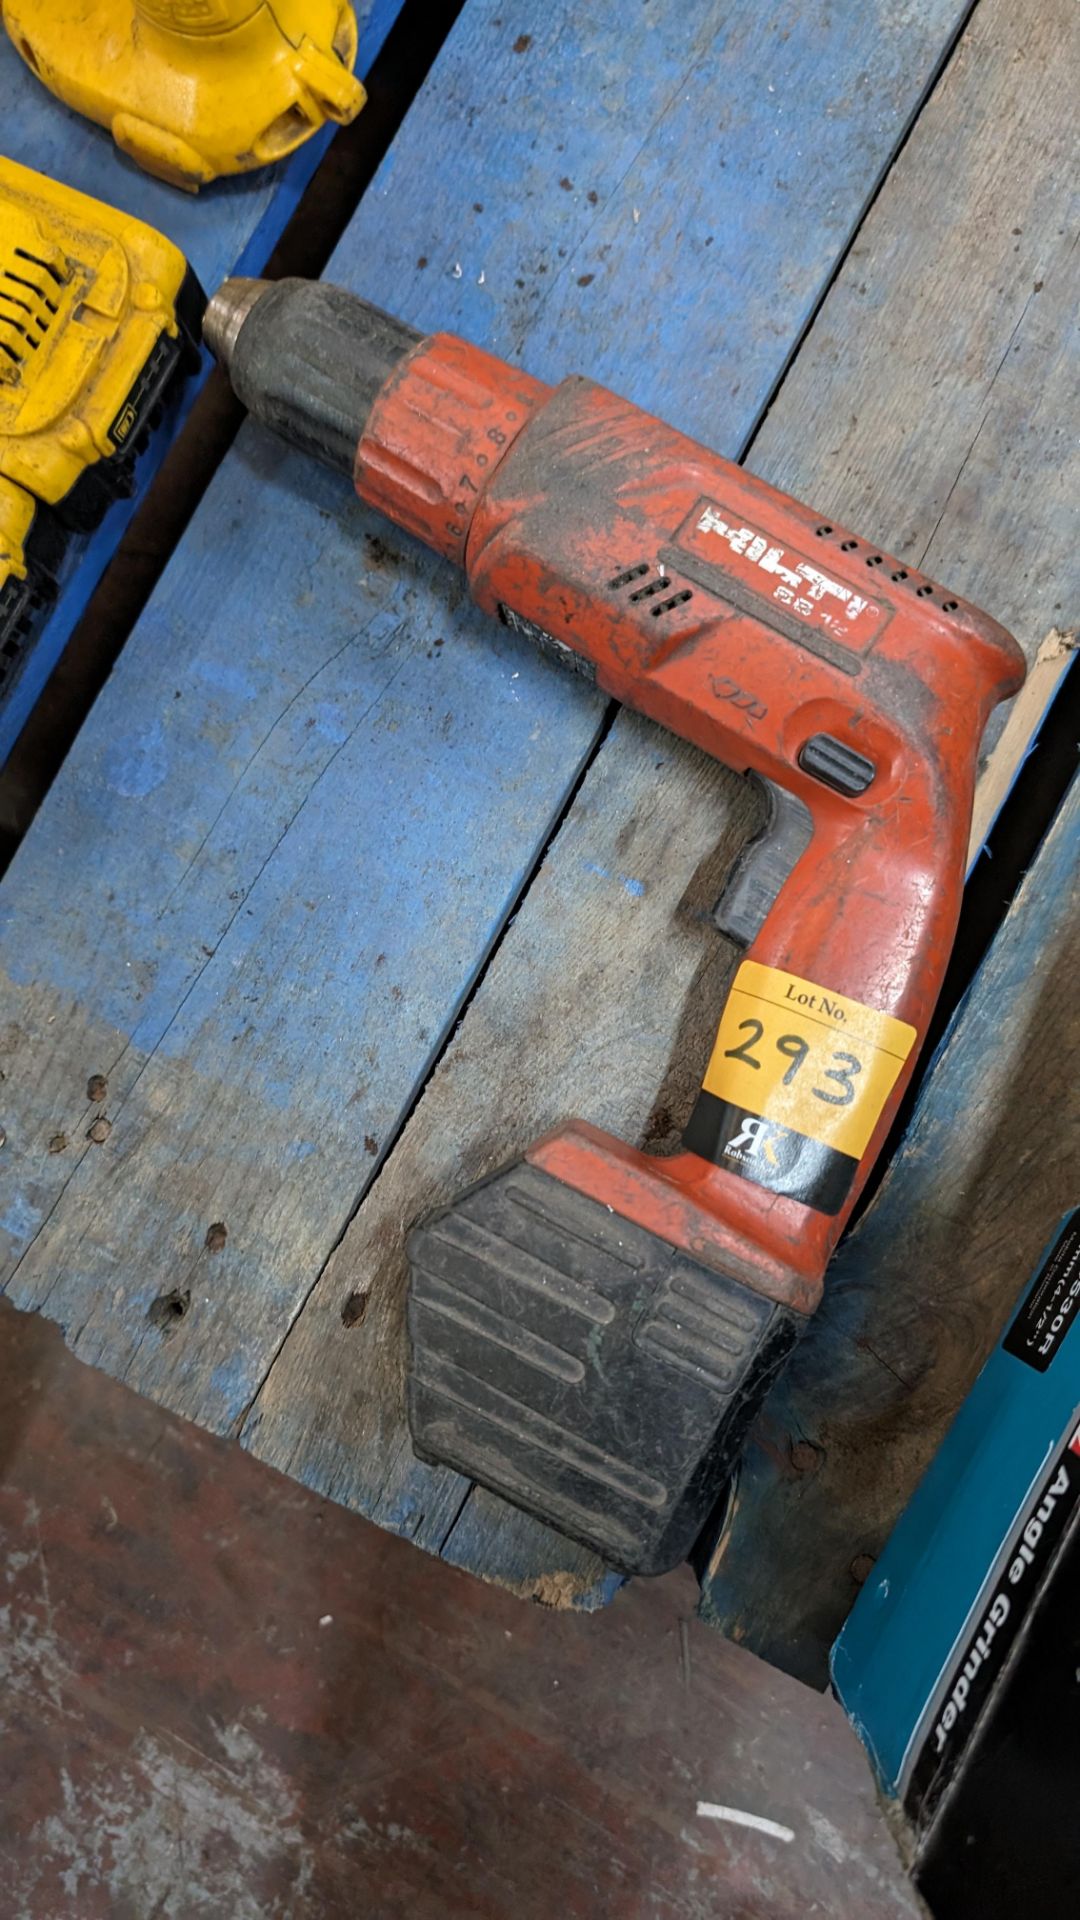 Hilti cordless driver with battery - no charger